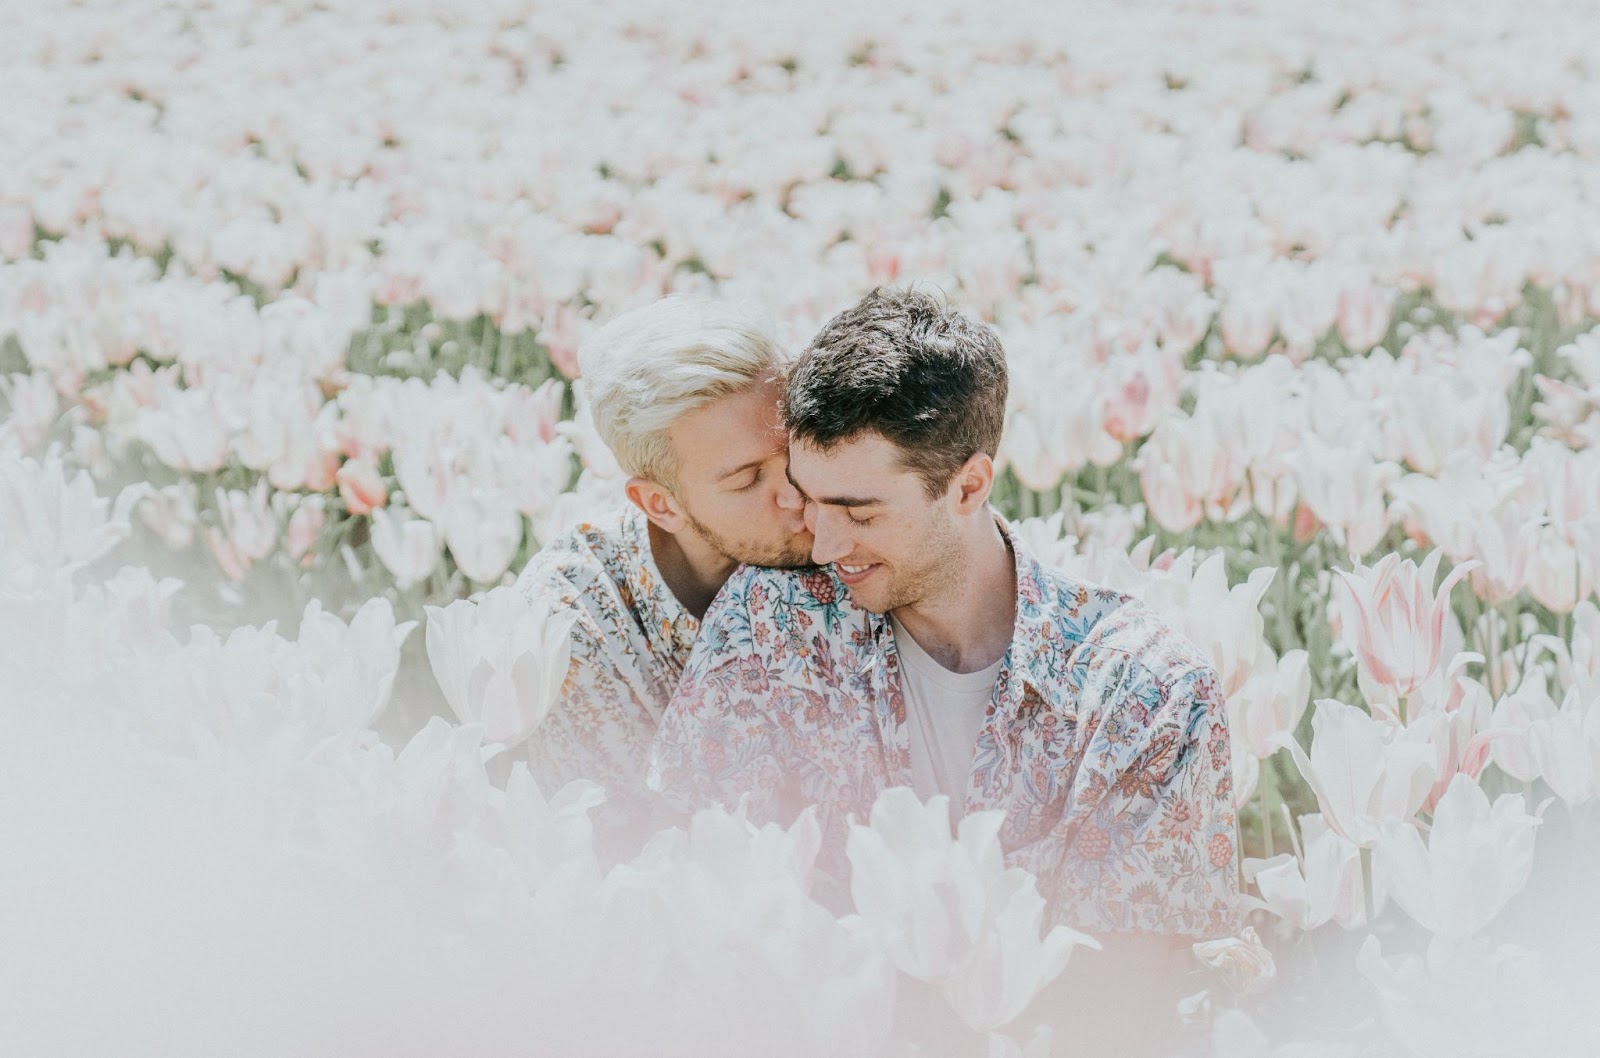 couple in matching engagement photoshoot outfits sitting in a field of flowers while one kisses the other's cheek